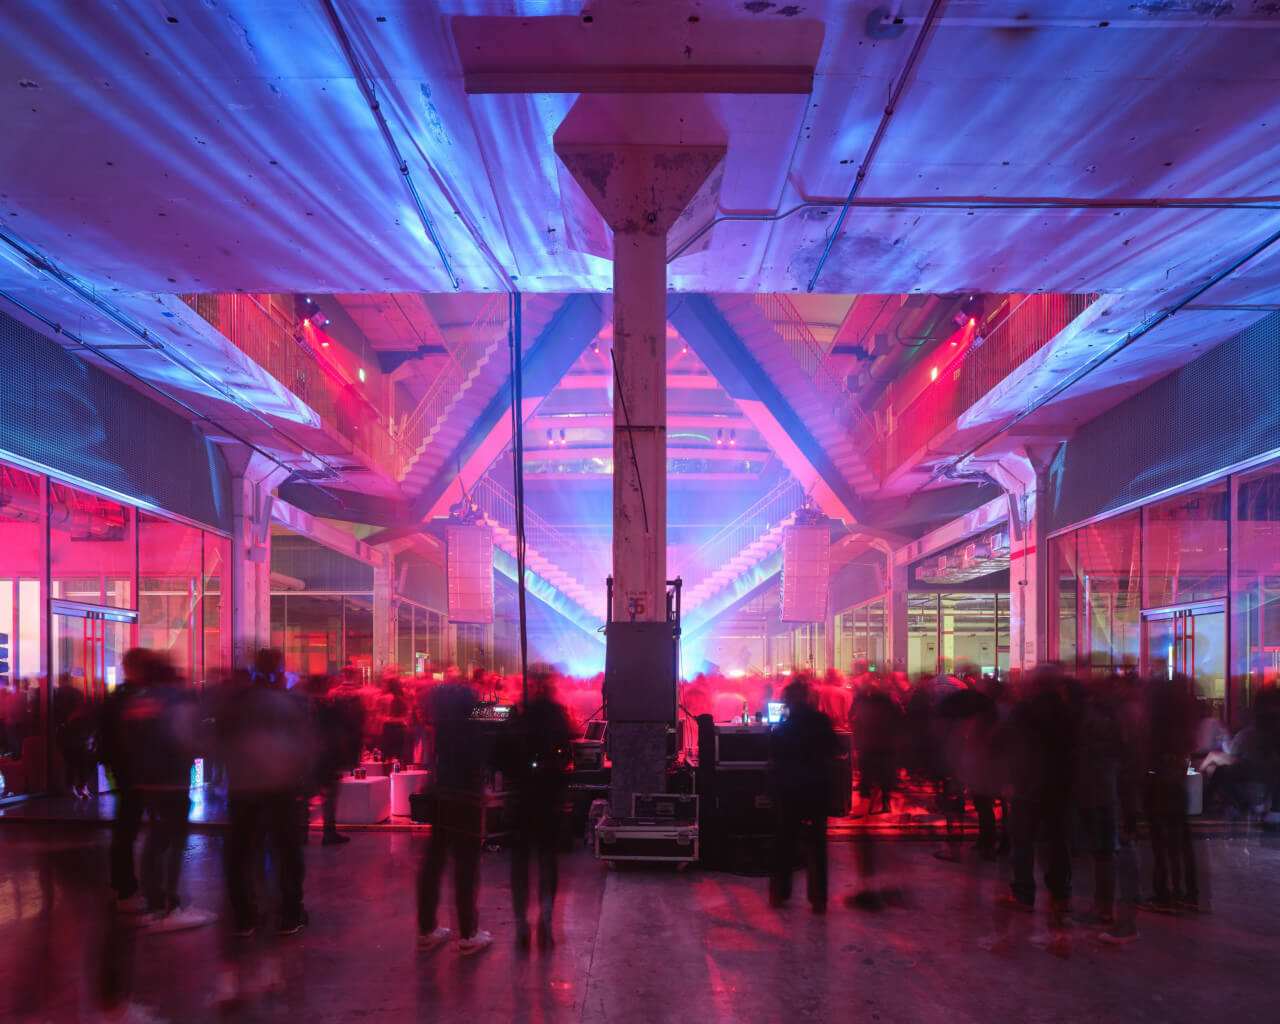 an event held in a soaring industrial space with moody lighting